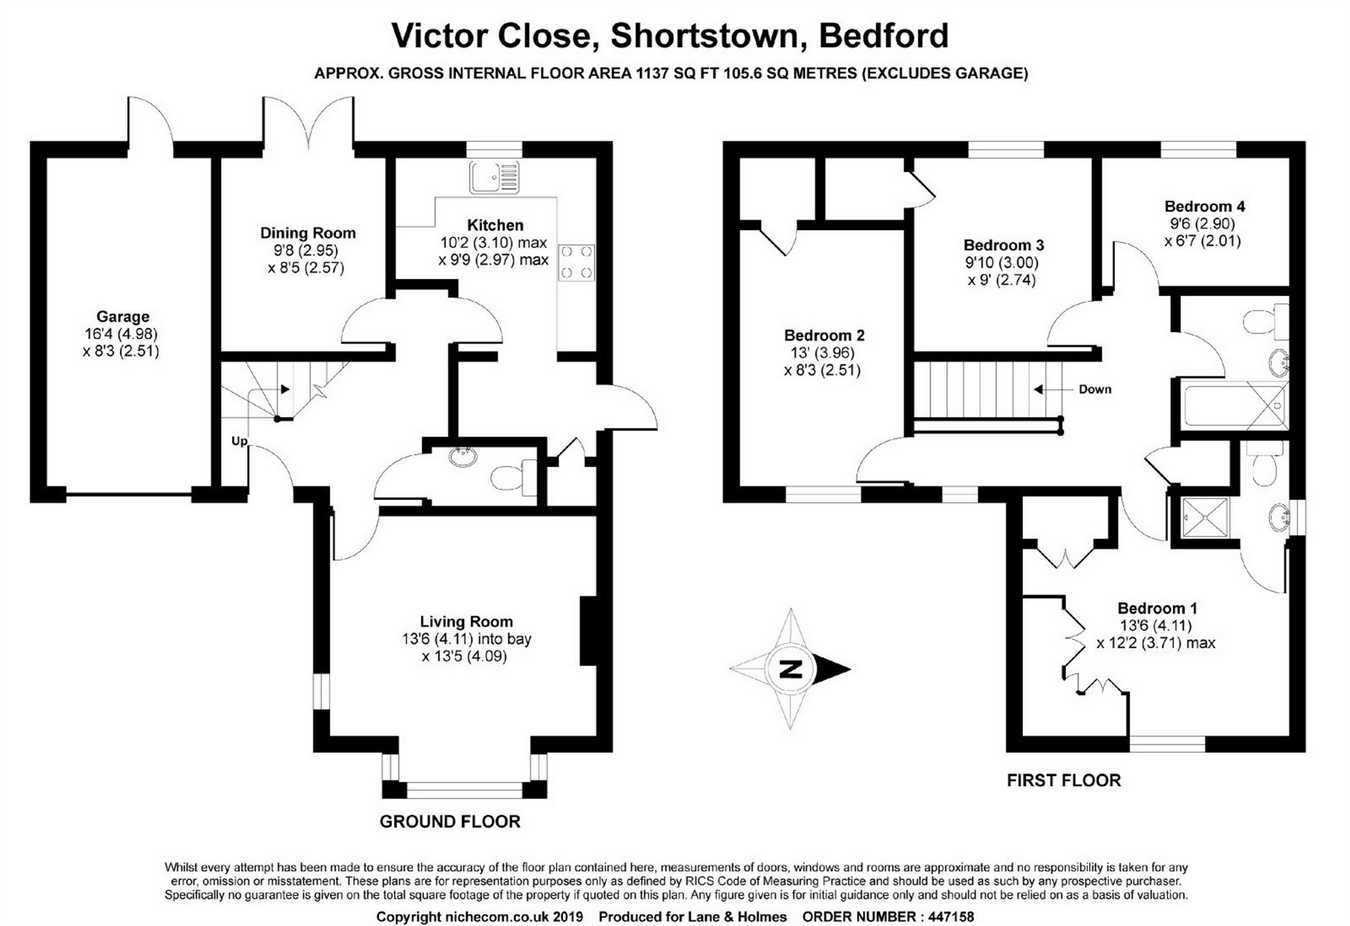 4 Bedrooms Detached house for sale in Victor Close, Shortstown, Bedford MK42